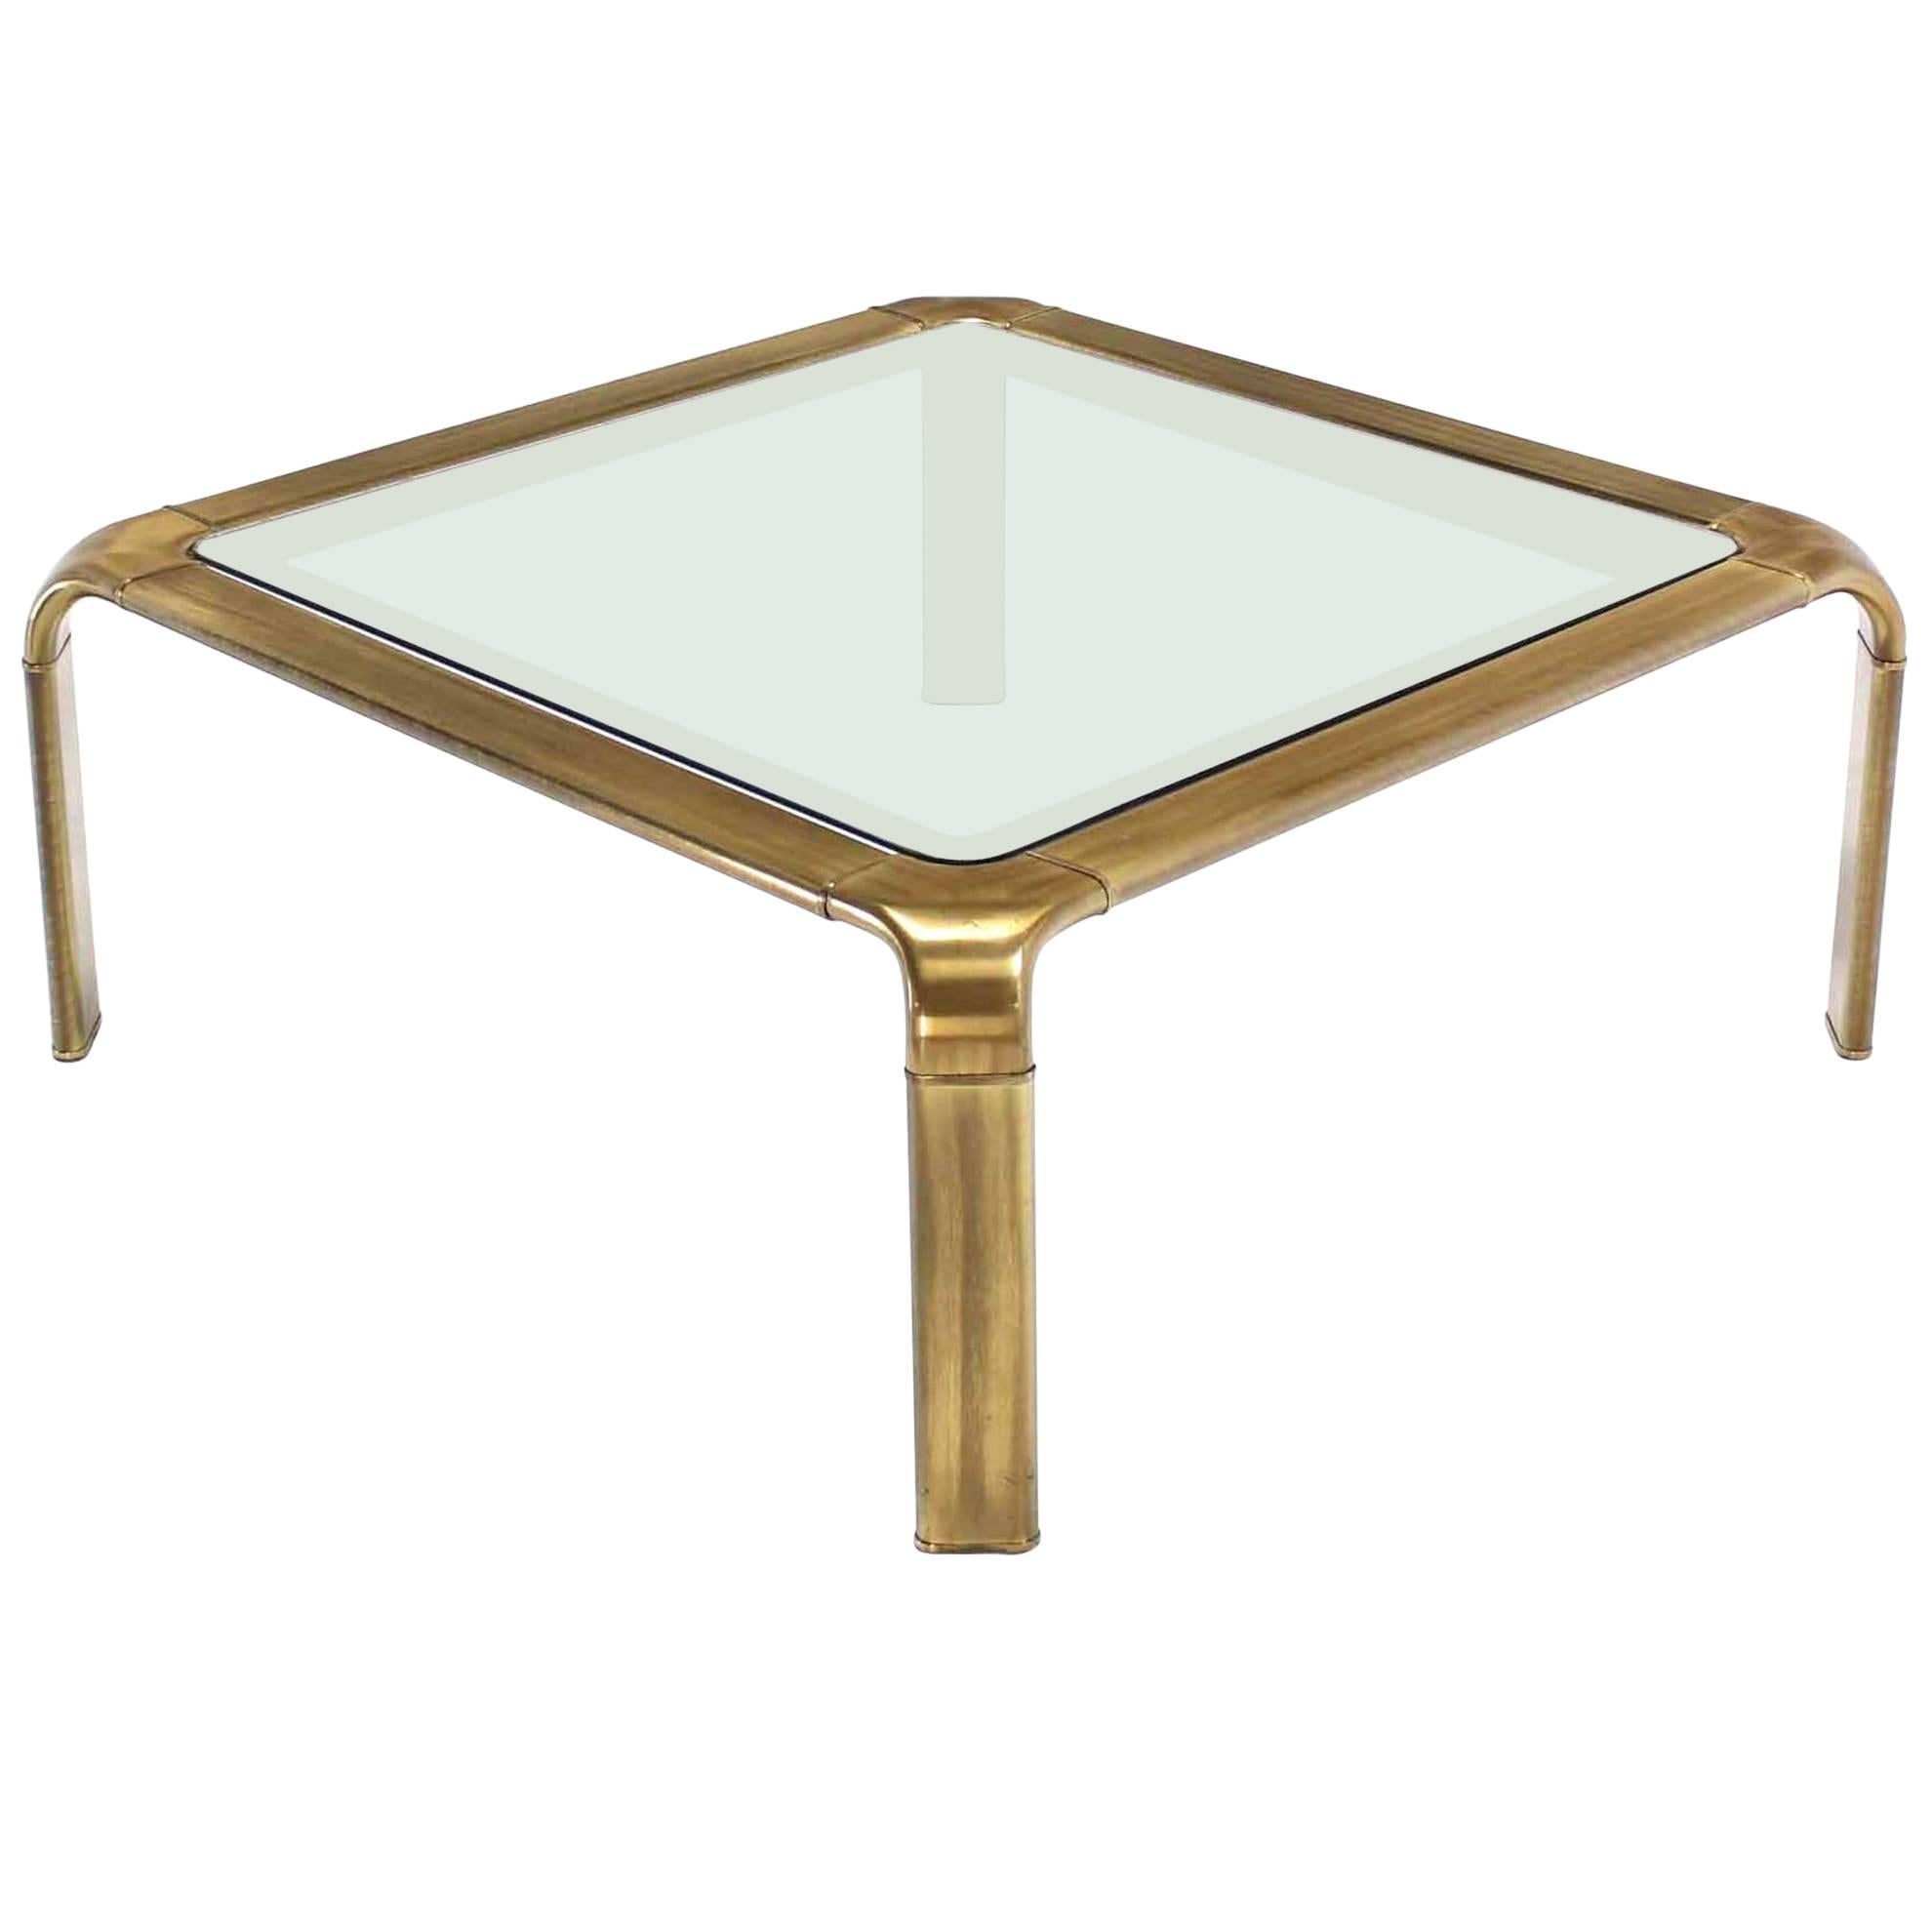 Square Modern Brass Coffee Table by Widdicomb